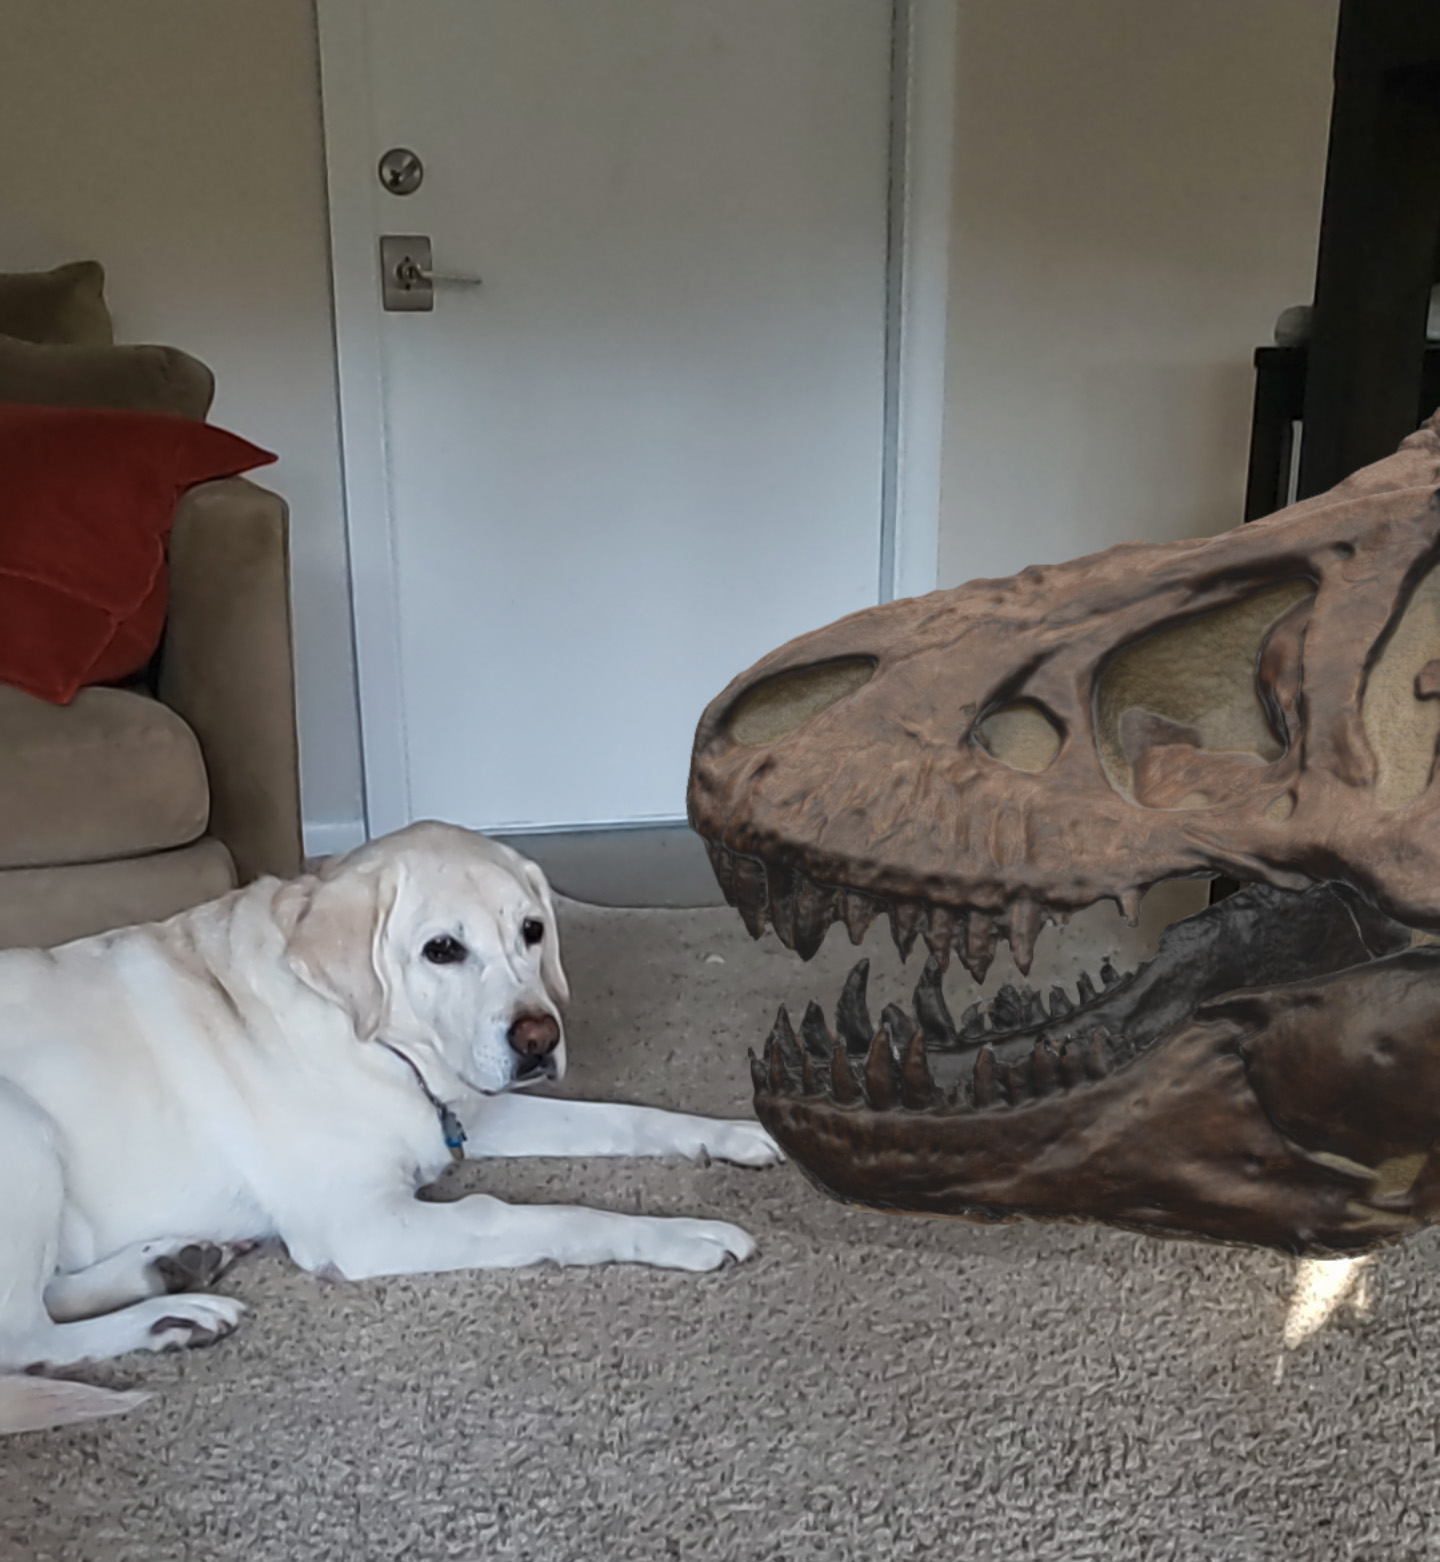 Augmented reality T-rex next to dog